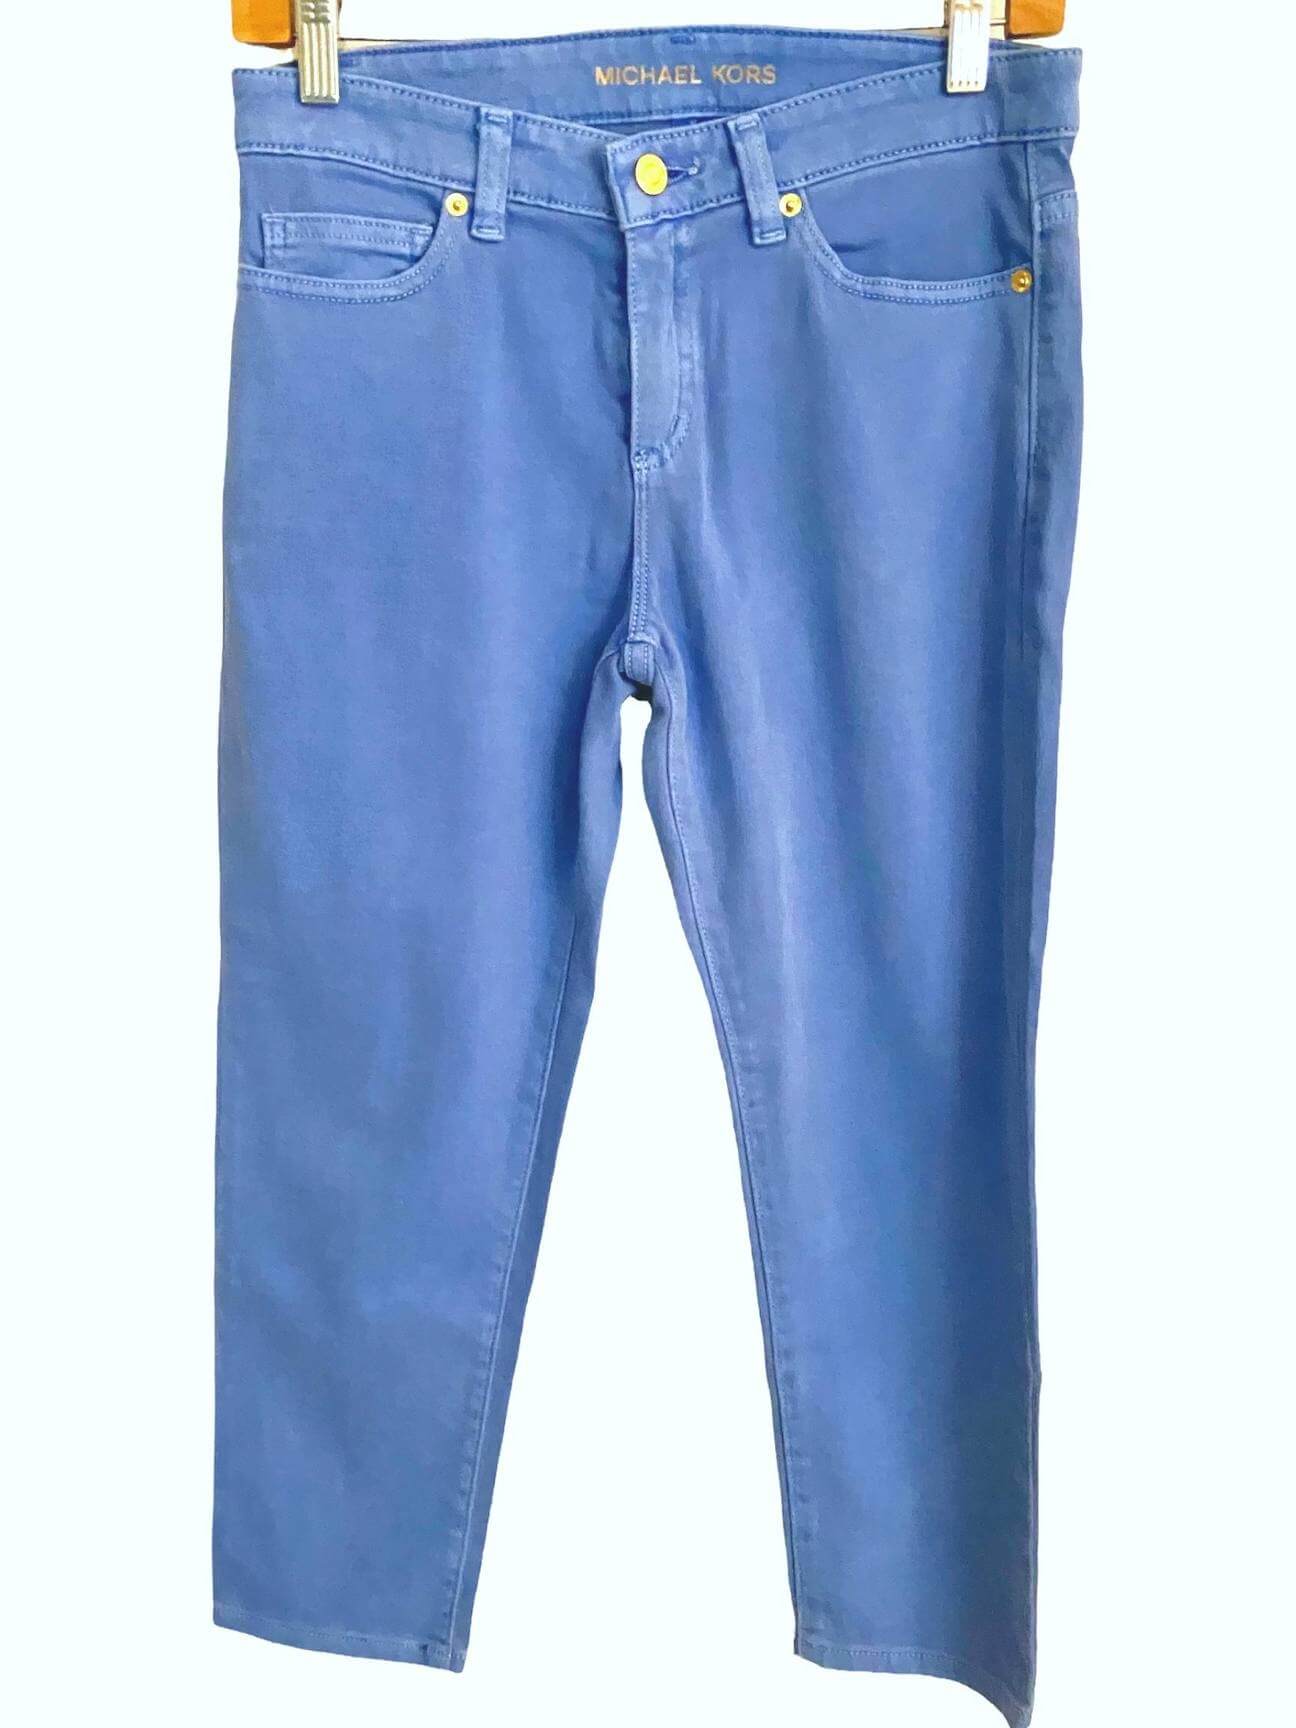 Cool Summer MICHAEL KORS periwinkle blue cropped jeans